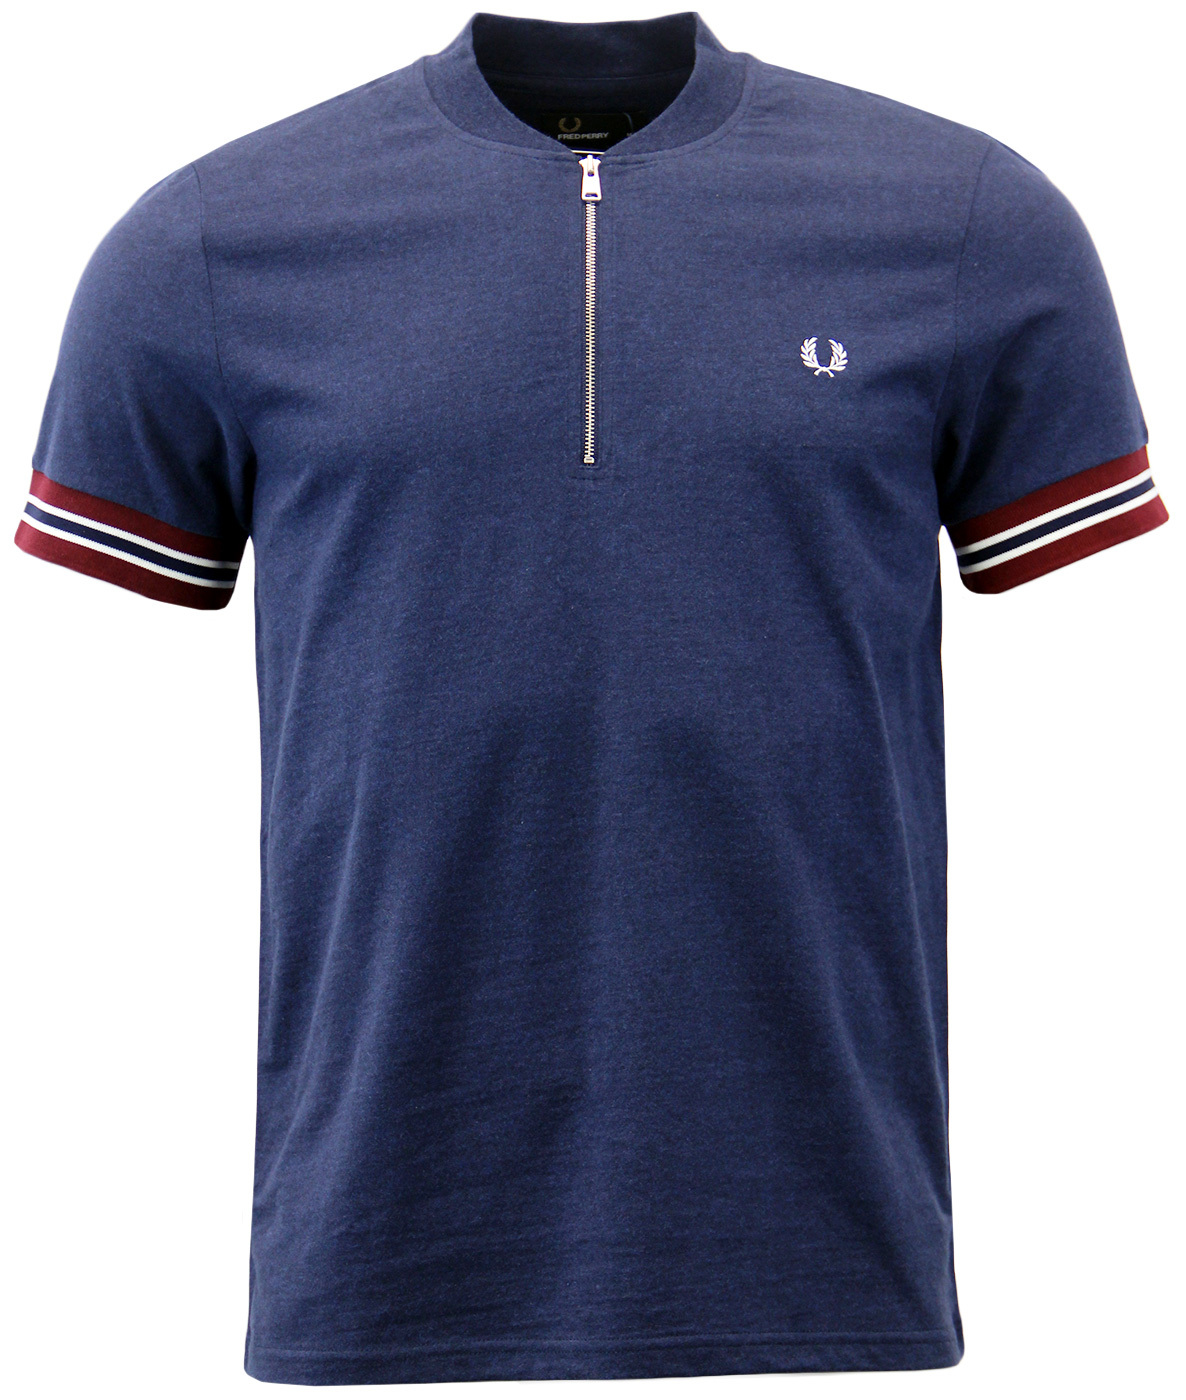 FRED PERRY Retro Mod Bomber Collar Cycling Top 